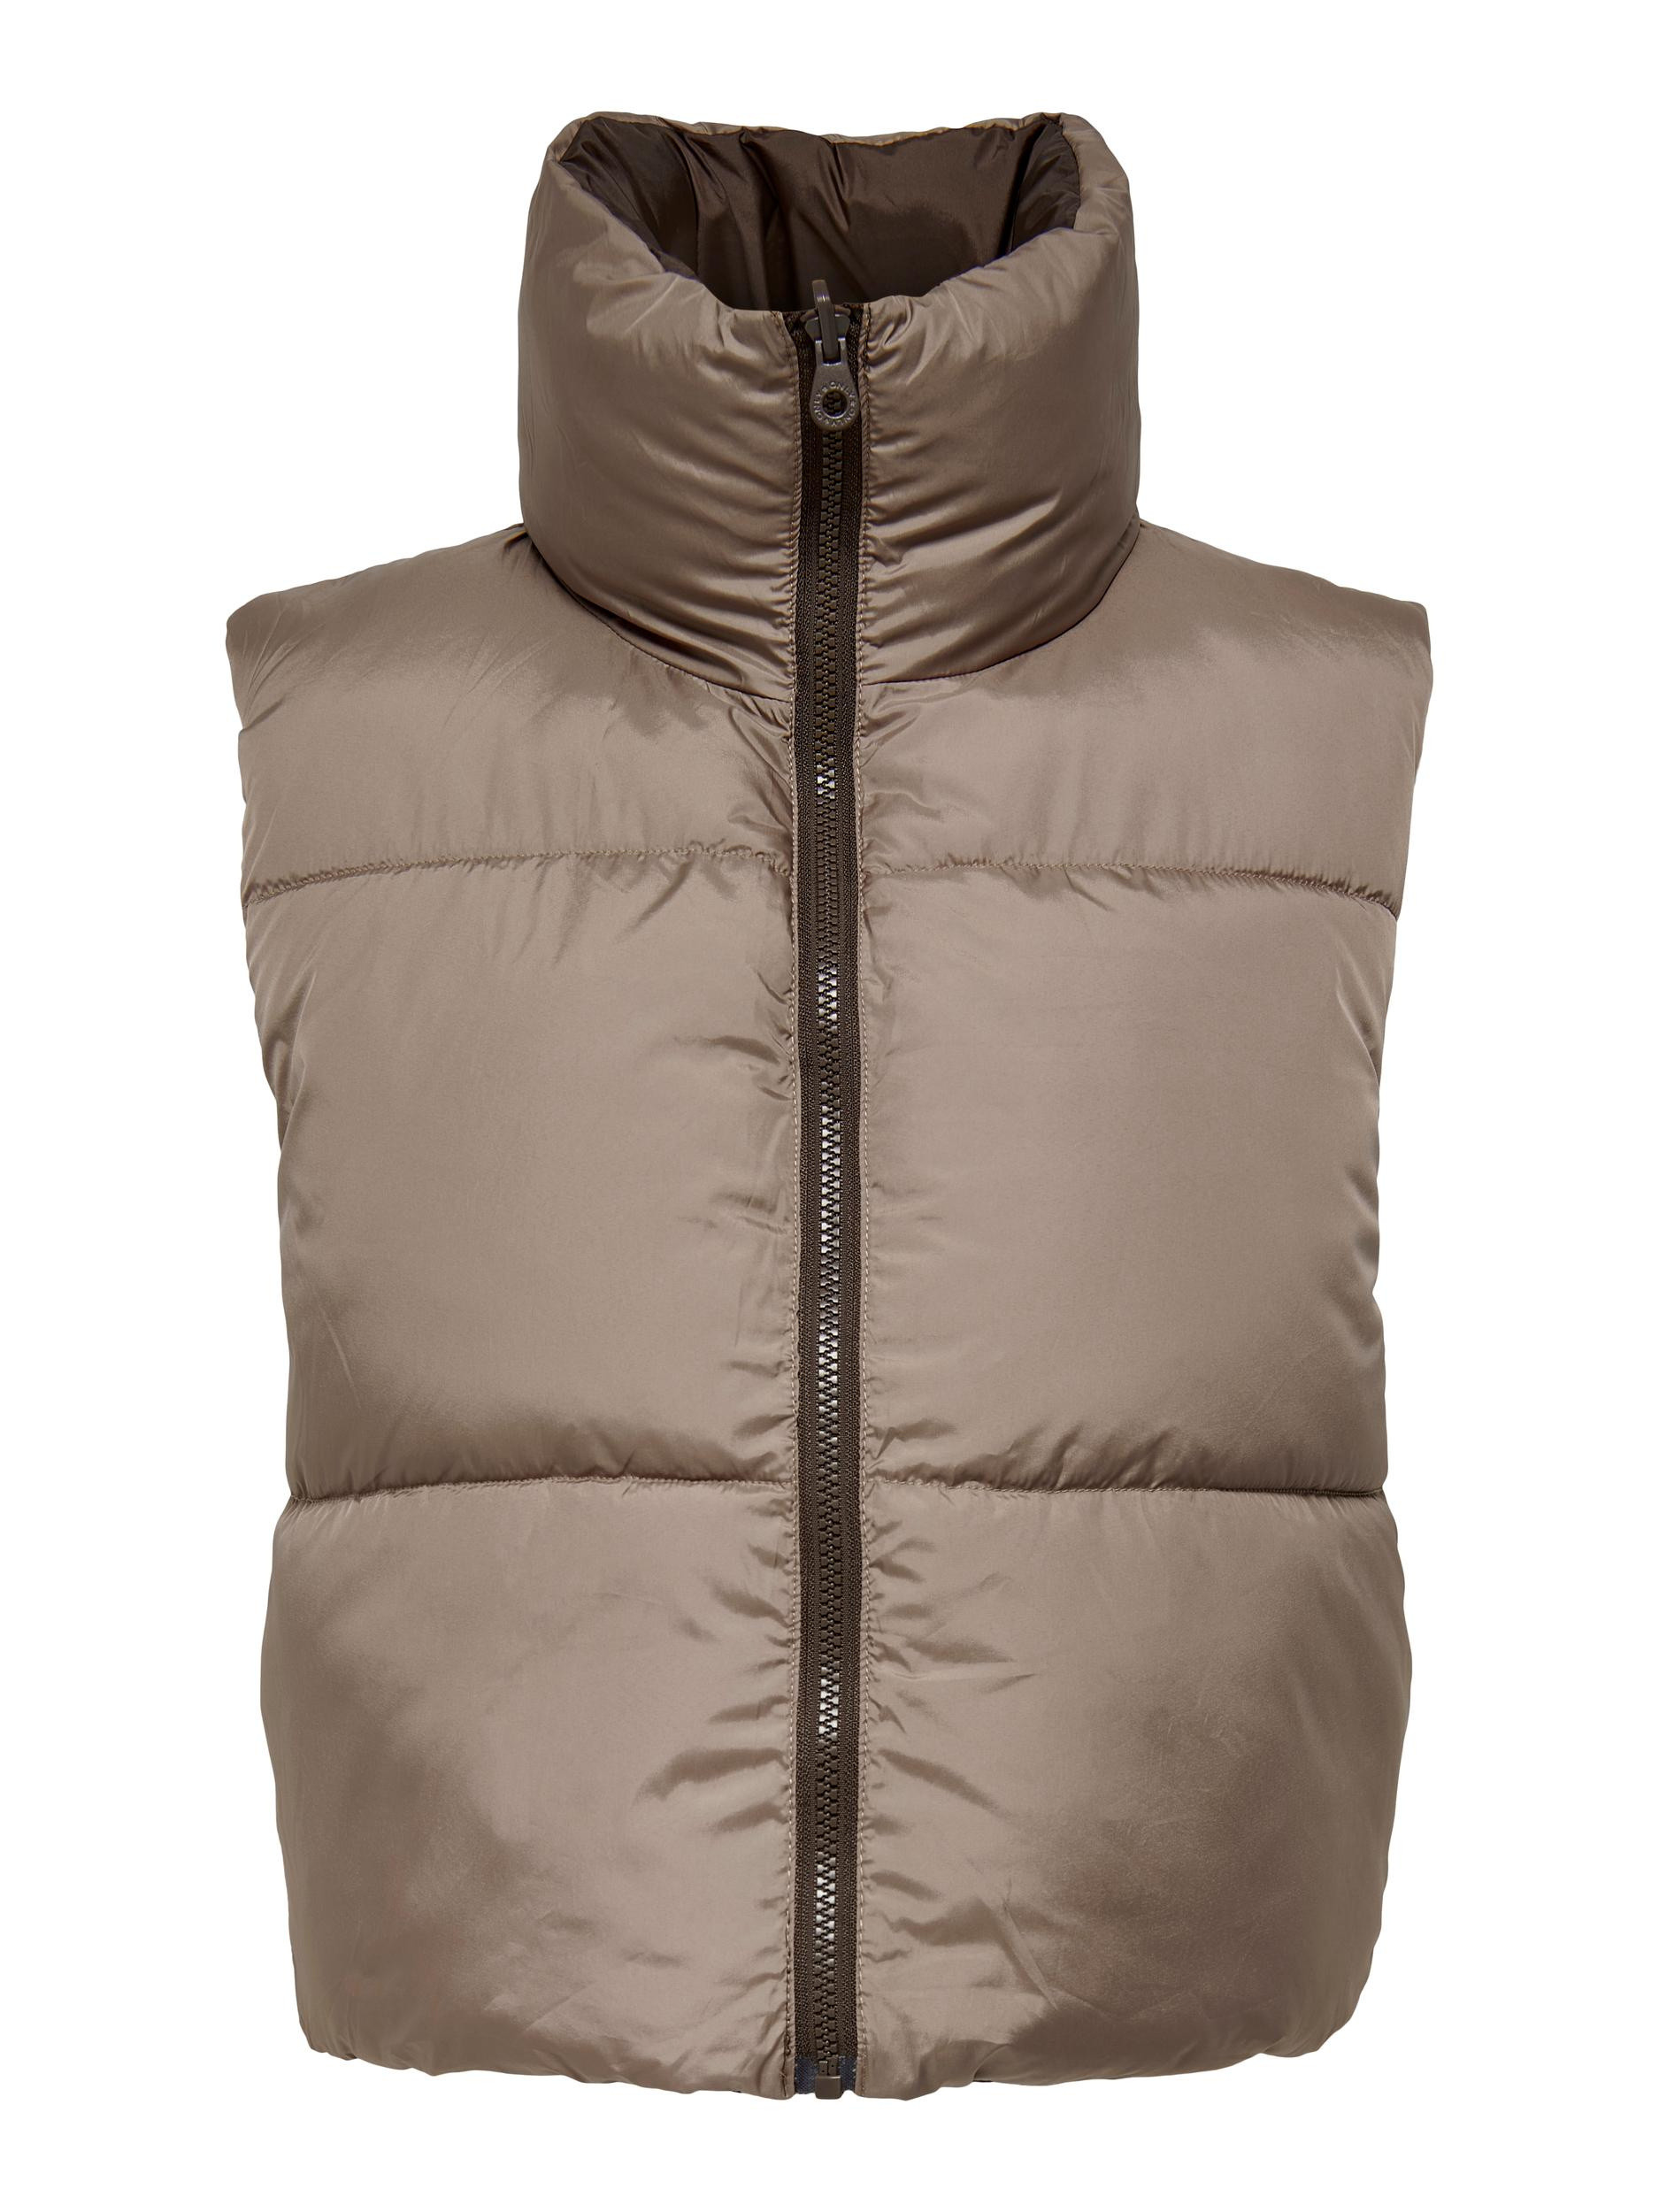 Only - Reversible quilted gilet, Brown, large image number 2